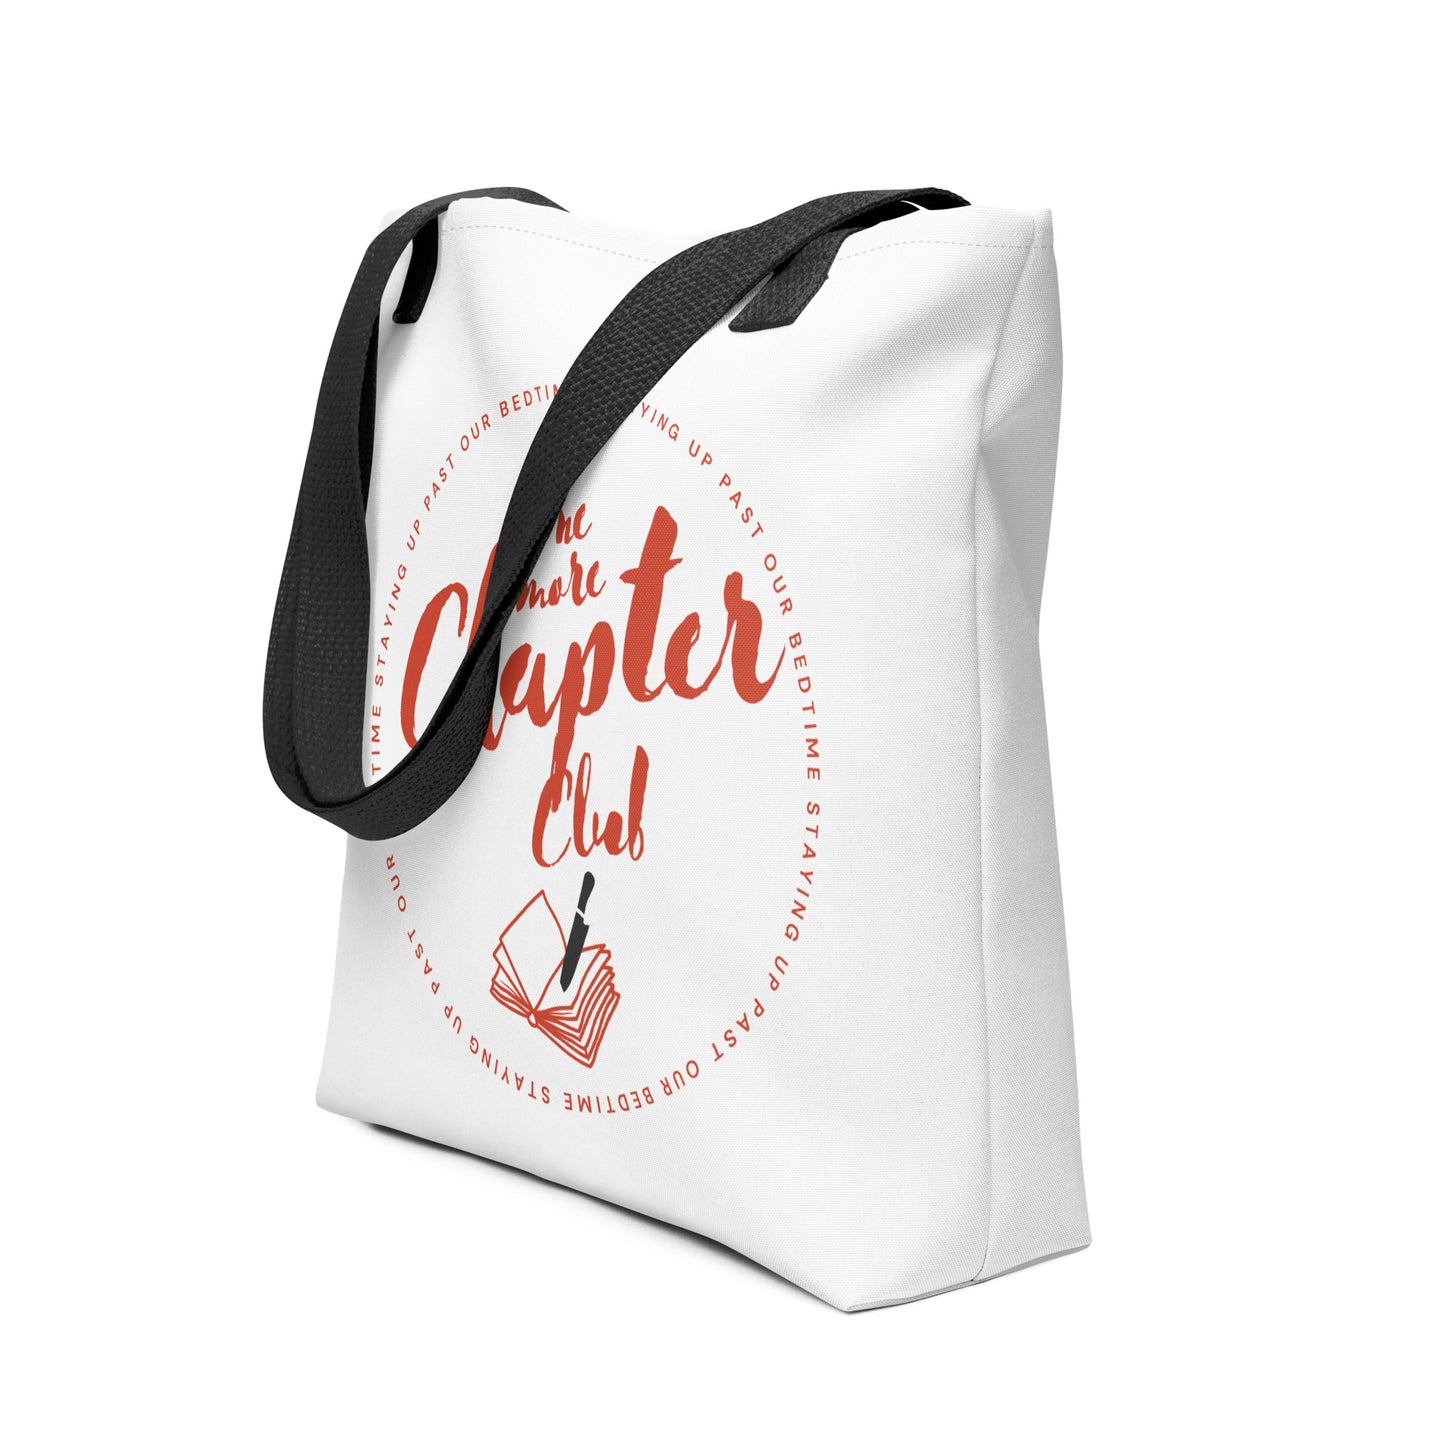 One More Chapter Club | Tote bag